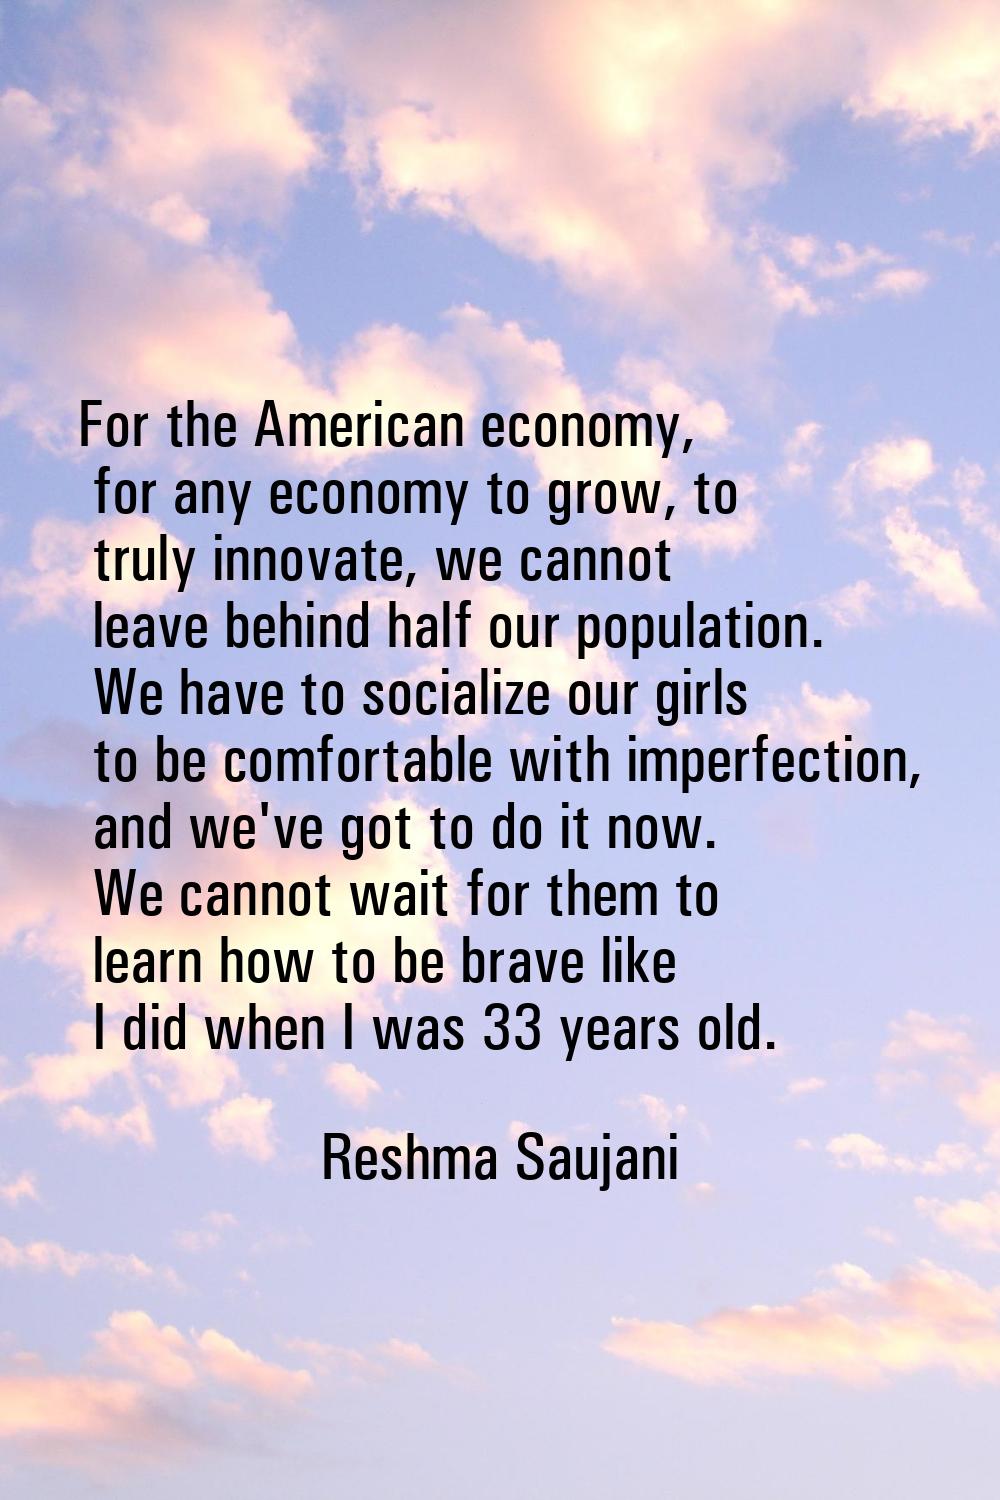 For the American economy, for any economy to grow, to truly innovate, we cannot leave behind half o